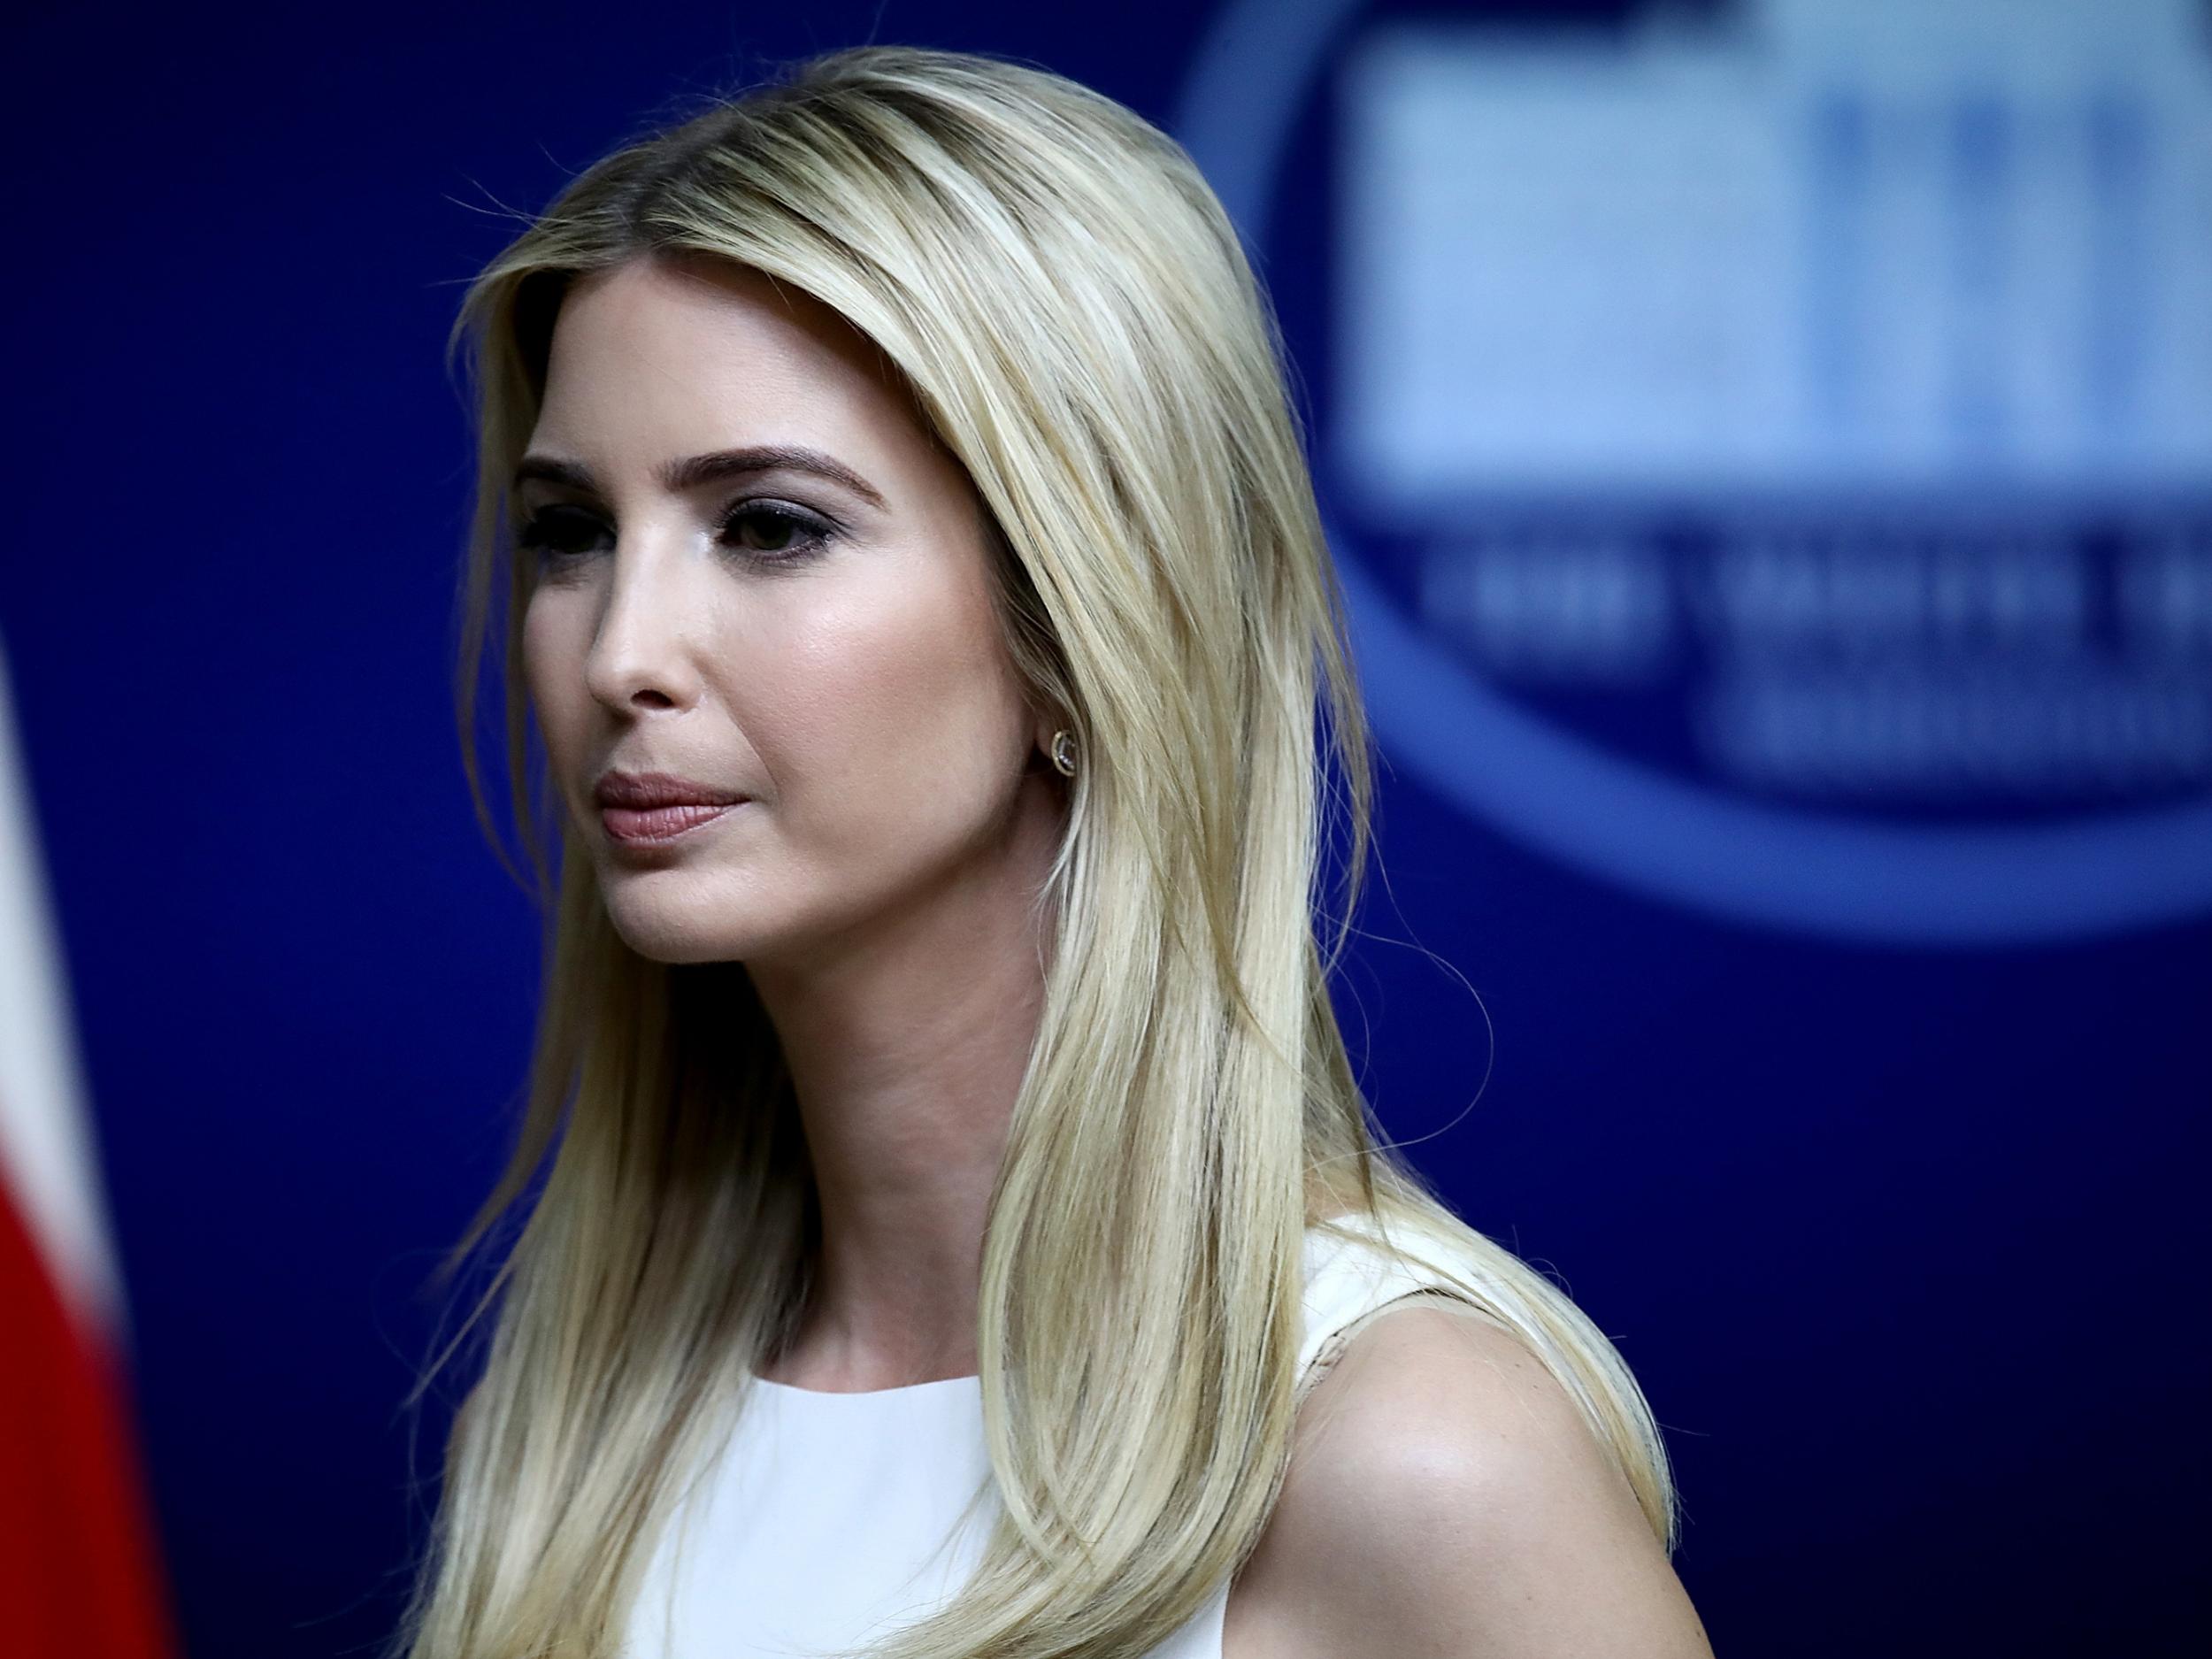 Ivanka Trump was apparently upset by her father's behaviour